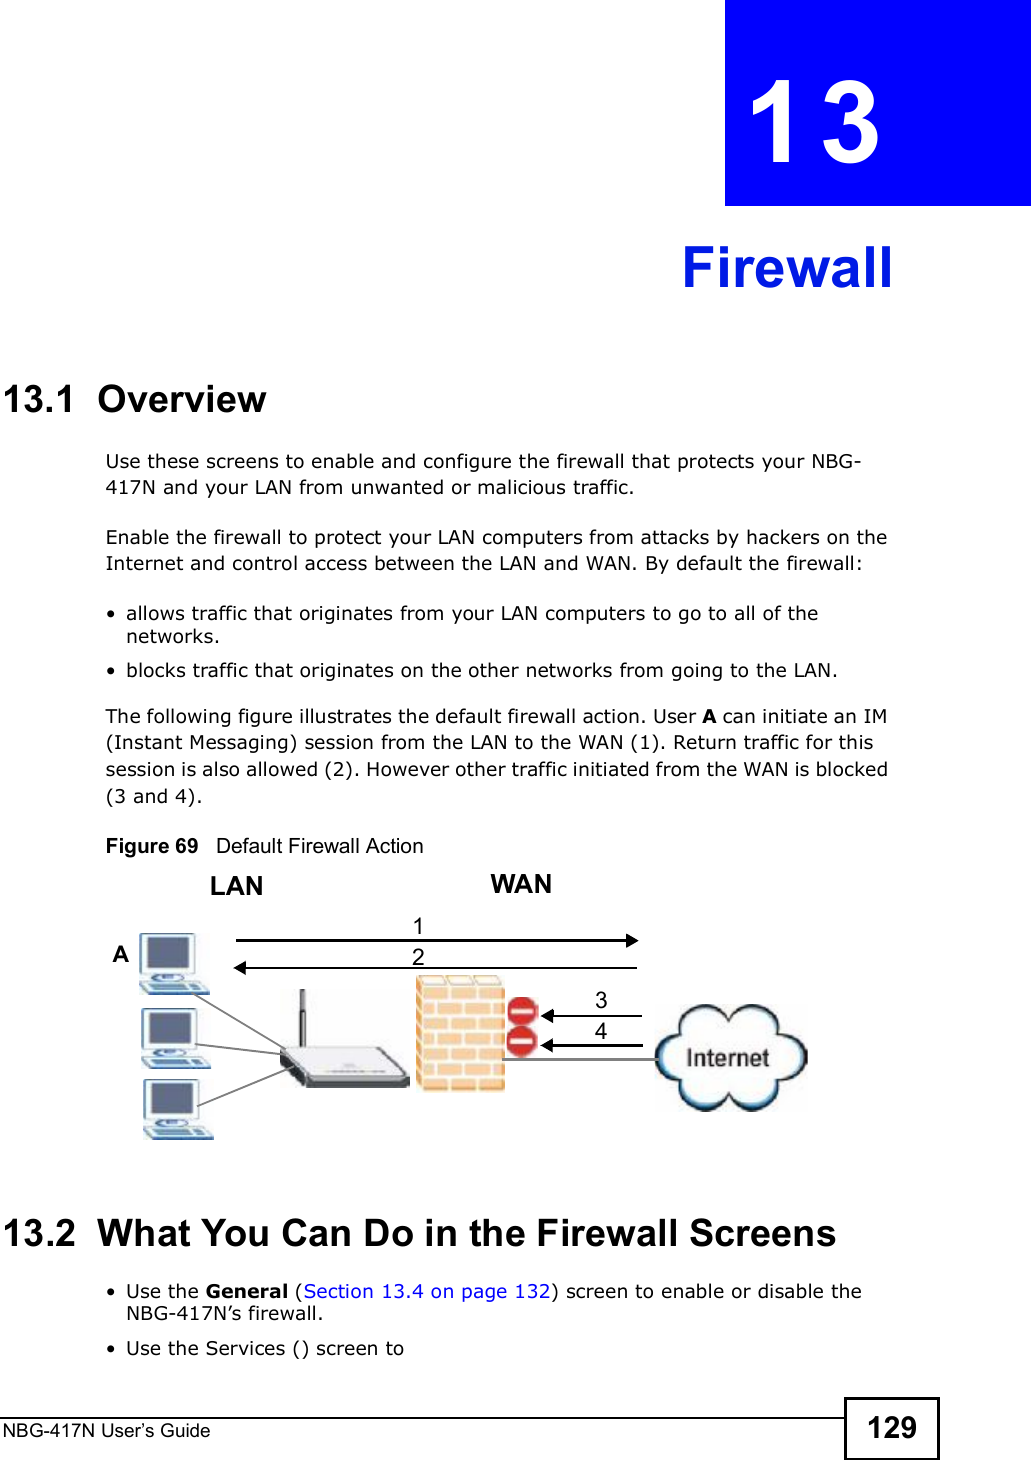 NBG-417N User s Guide 129CHAPTER  13  Firewall13.1  Overview   Use these screens to enable and configure the firewall that protects your NBG-417N and your LAN from unwanted or malicious traffic.Enable the firewall to protect your LAN computers from attacks by hackers on the Internet and control access between the LAN and WAN. By default the firewall: allows traffic that originates from your LAN computers to go to all of the networks.  blocks traffic that originates on the other networks from going to the LAN. The following figure illustrates the default firewall action. User A can initiate an IM (Instant Messaging) session from the LAN to the WAN (1). Return traffic for this session is also allowed (2). However other traffic initiated from the WAN is blocked (3 and 4).Figure 69   Default Firewall Action13.2  What You Can Do in the Firewall Screens Use the General (Section 13.4 on page 132) screen to enable or disable the NBG-417N!s firewall. Use the Services () screen to WANLAN3412A